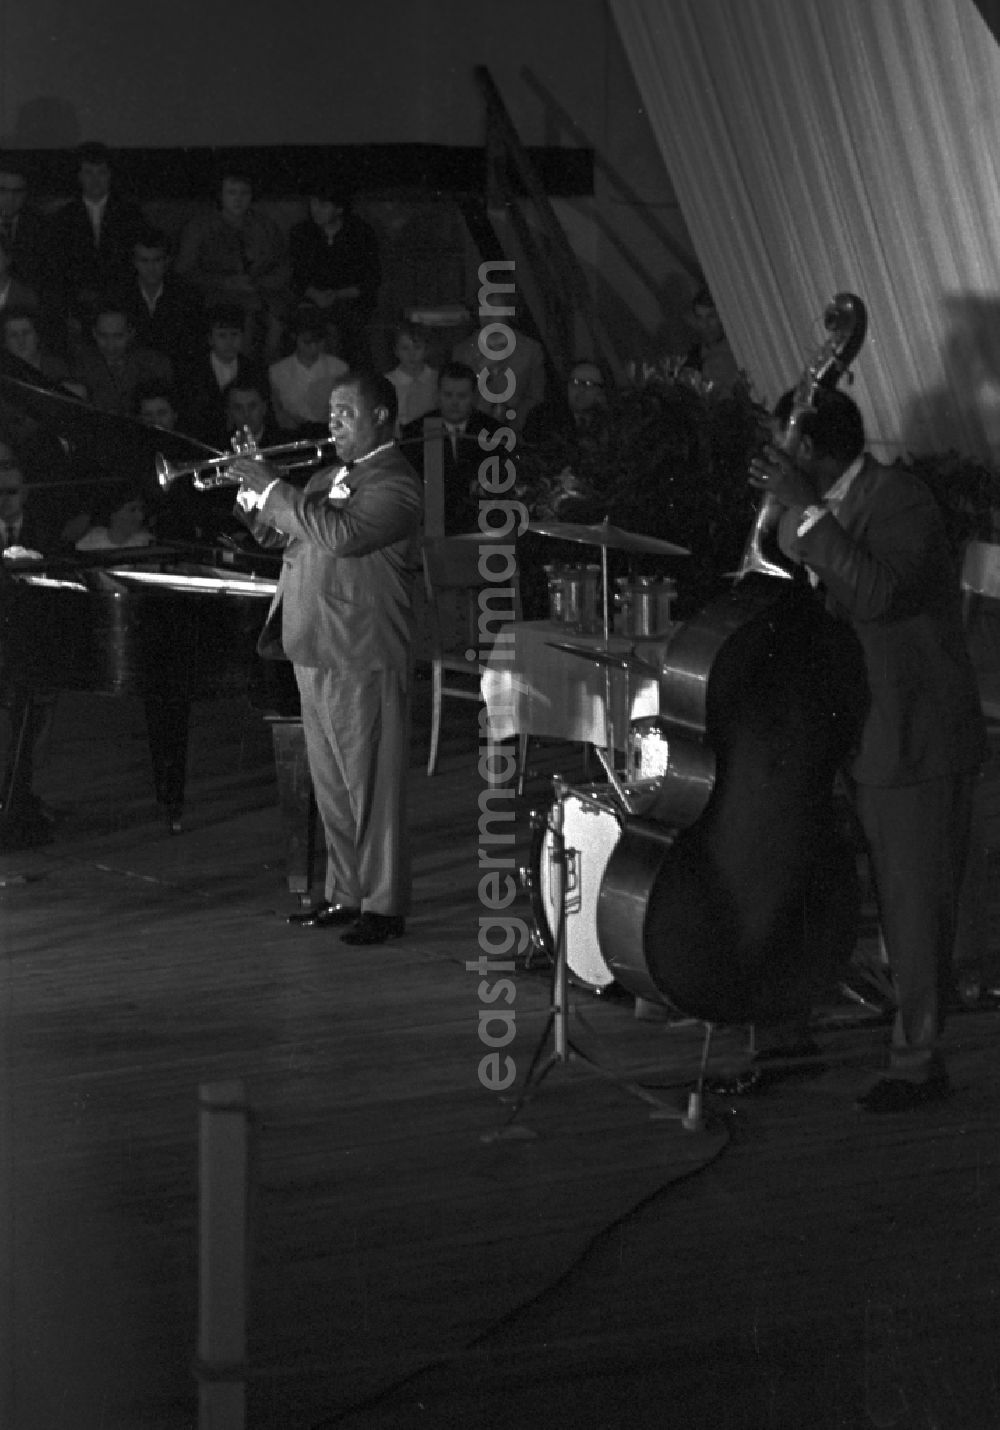 GDR photo archive: Magdeburg - Daniel Louis Satchmo Armstrong (19